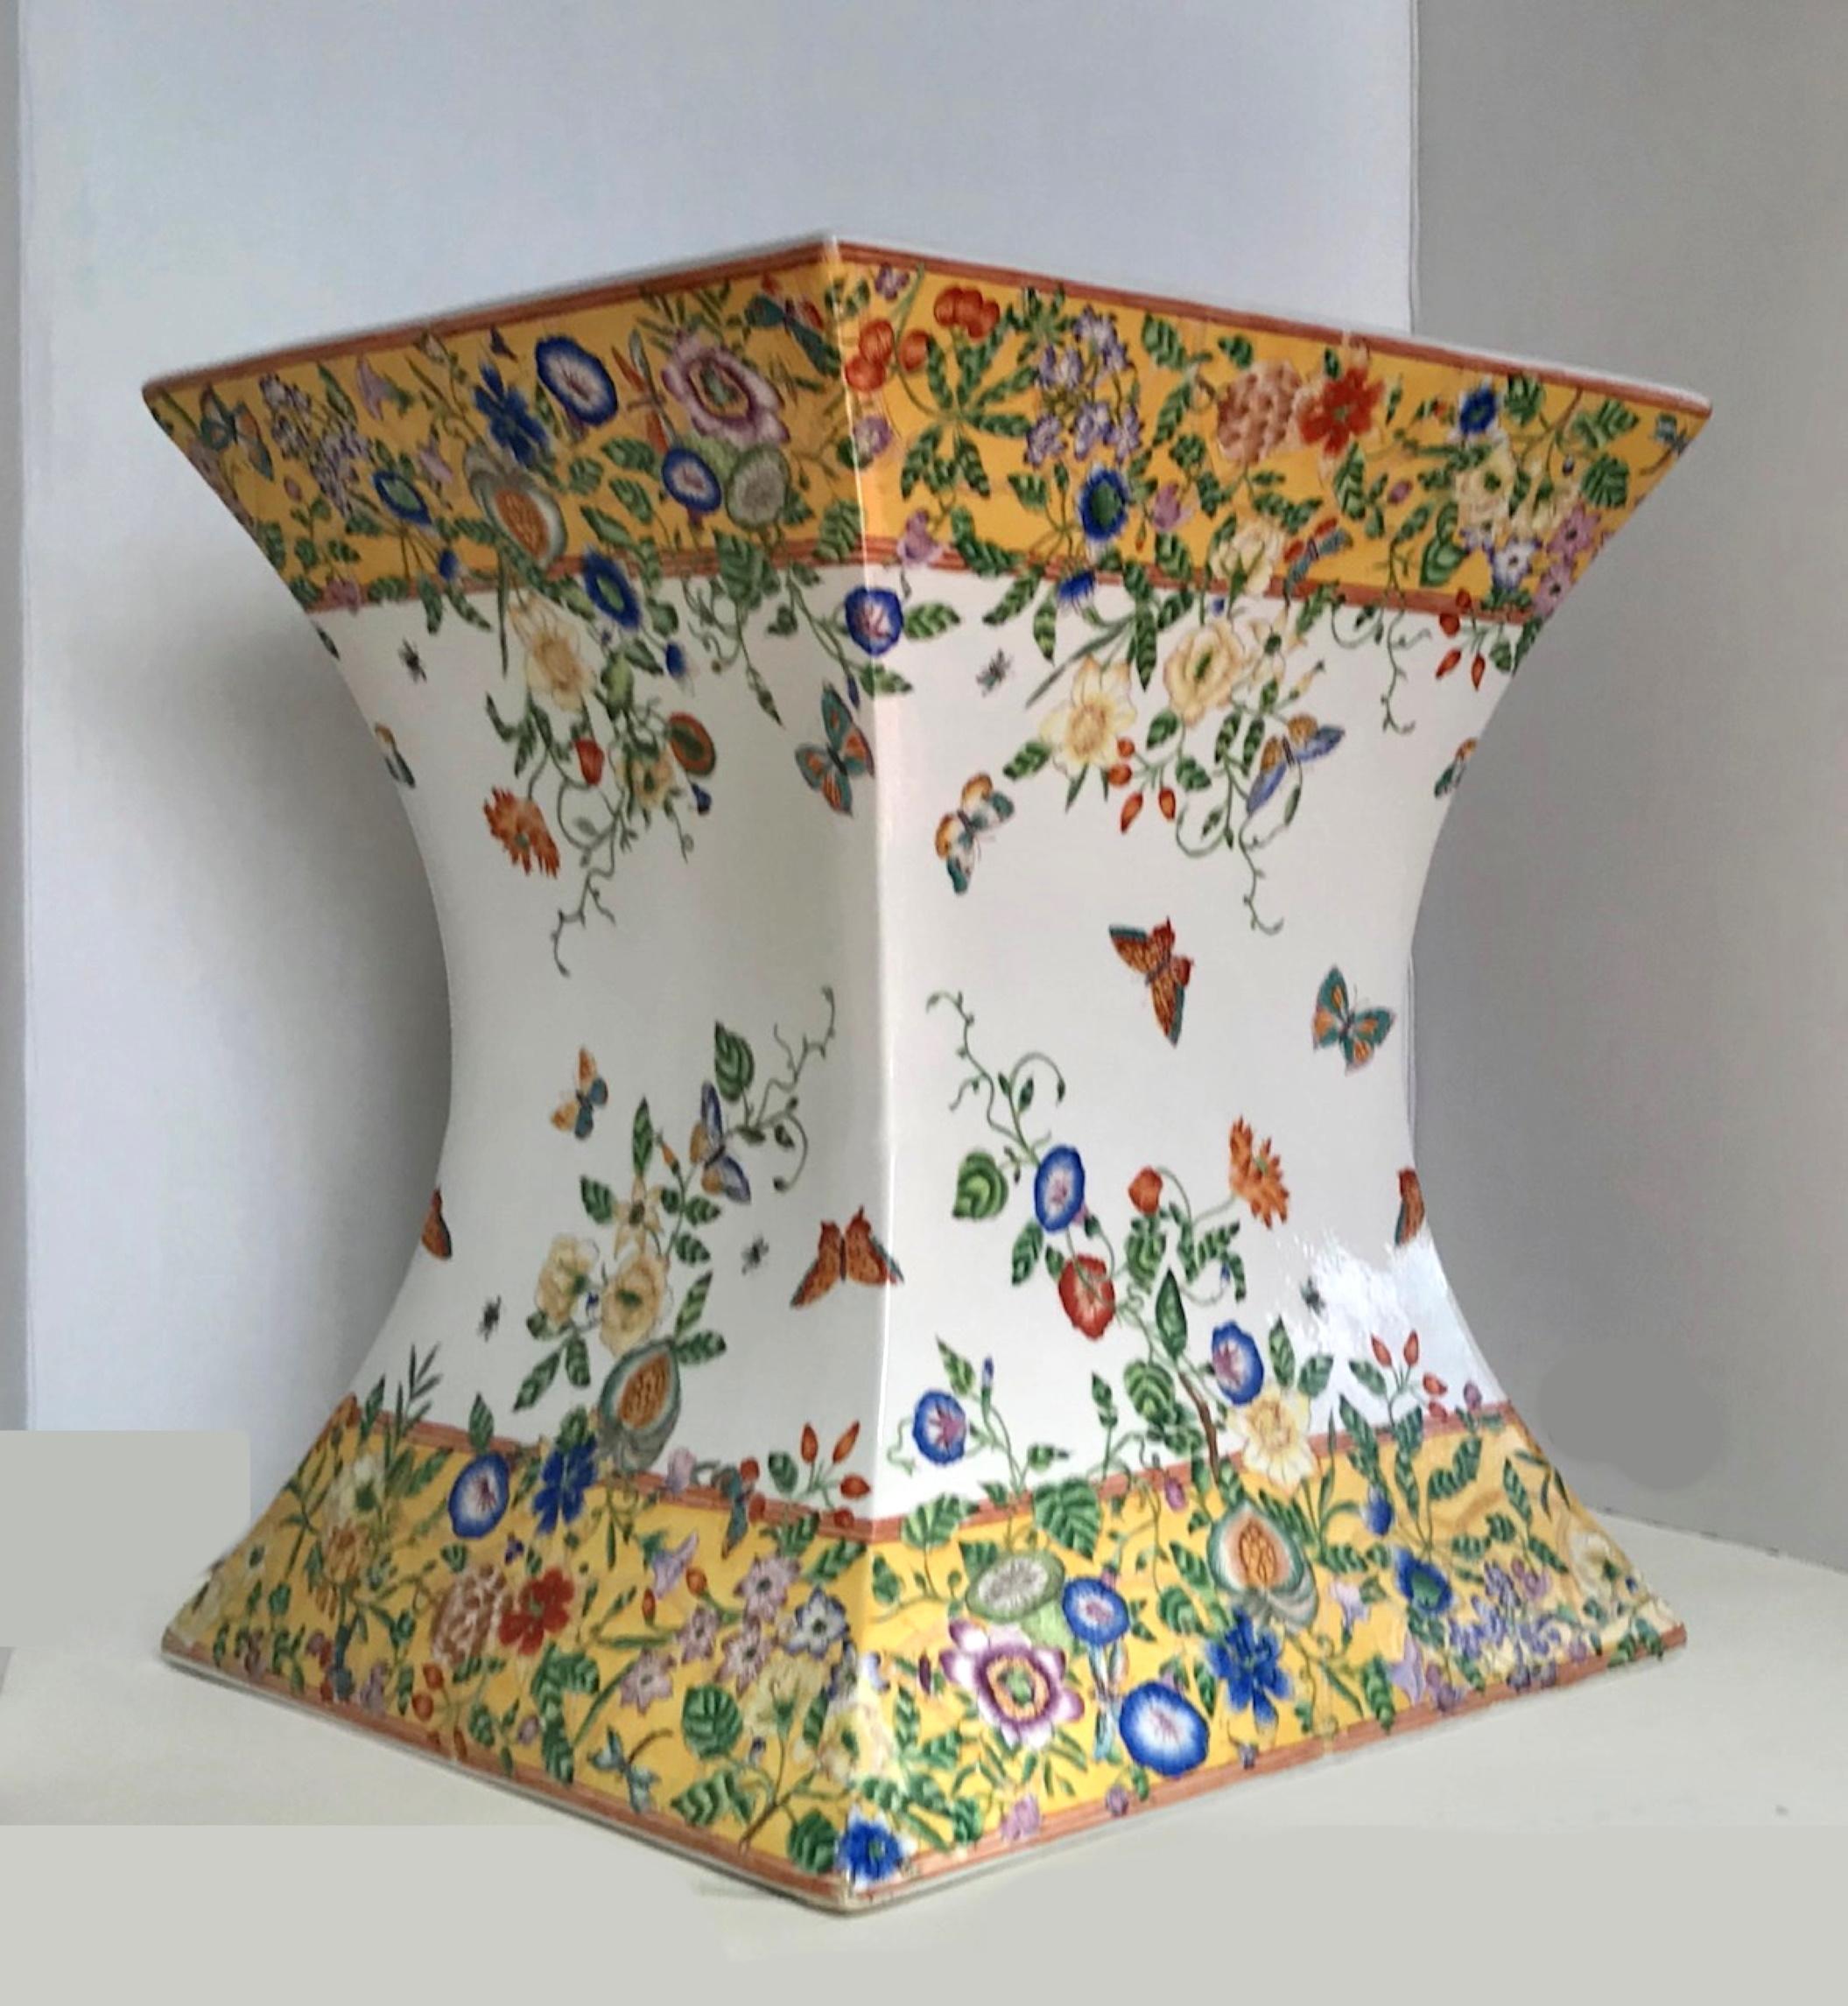 Vintage midcentury polychrome enameled Chinese porcelain garden seat.

Gorgeous exotic Chinese garden stool in an unusual and rare trapezoidal hourglass shape. It is beautifully hand painted with vibrant colors and lovely details. Multicolored